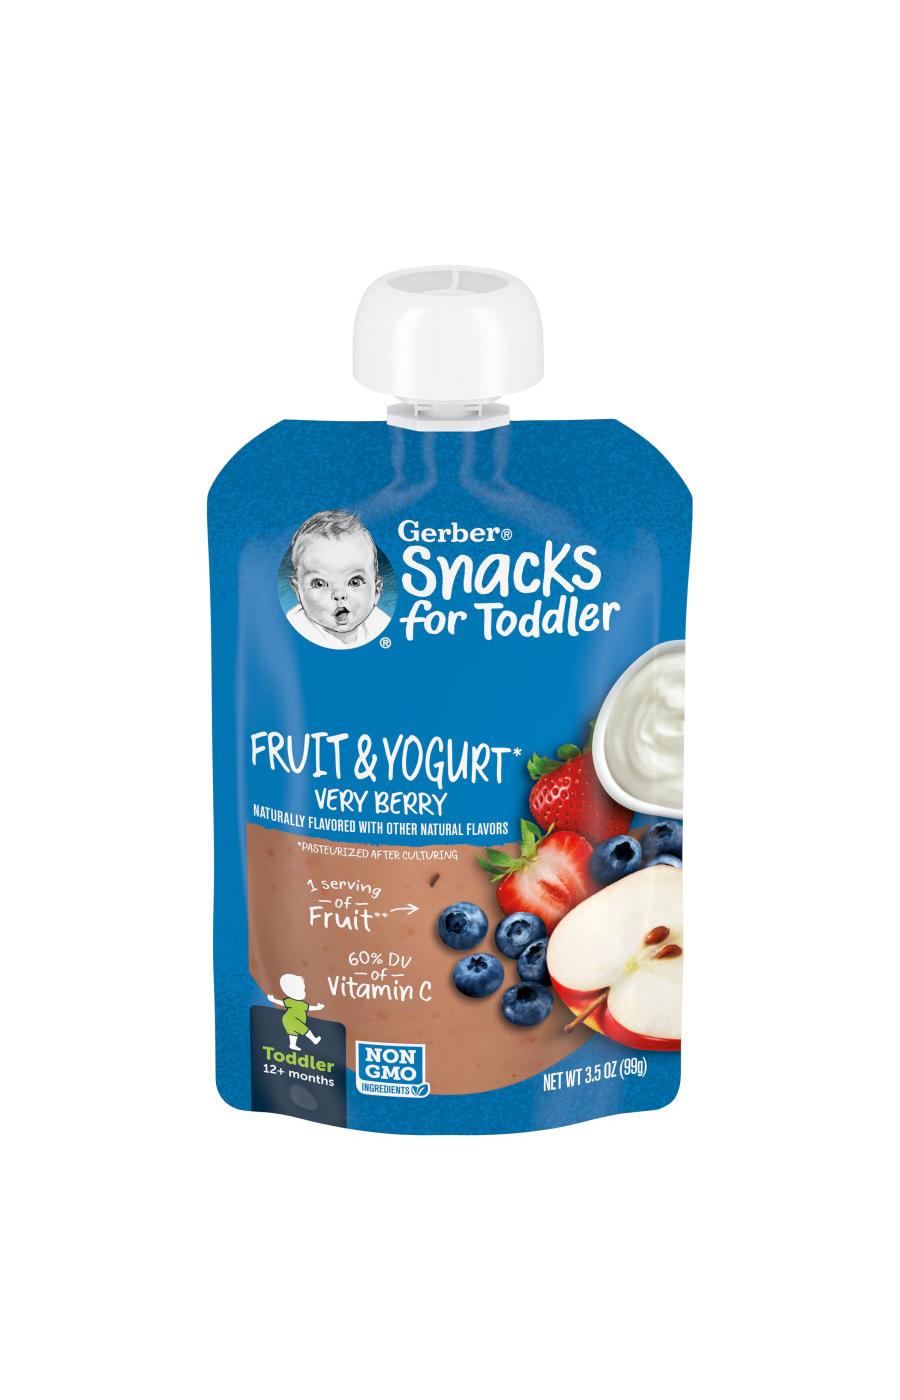 Gerber Snacks for Toddler Fruit & Yogurt Pouch - Very Berry; image 1 of 8